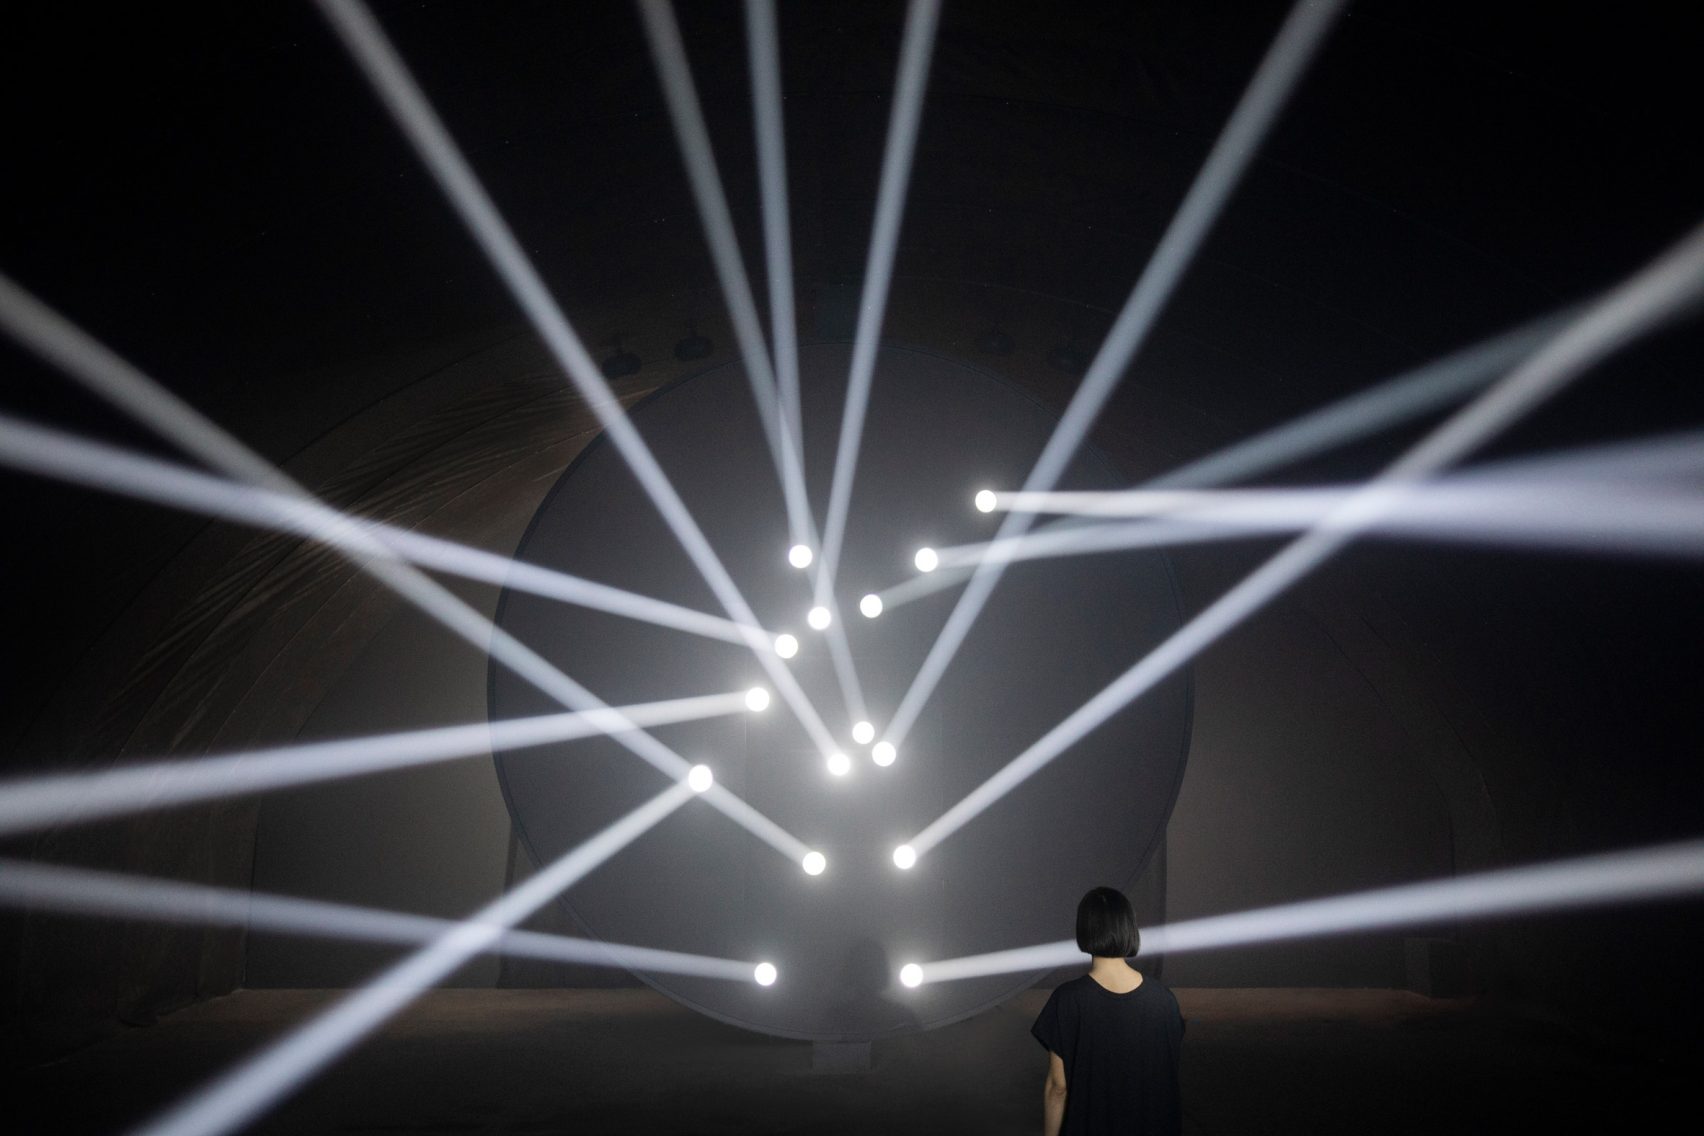   Humanscale's Bodies In Motion installation for Milan design week is an interactive light sculpture  